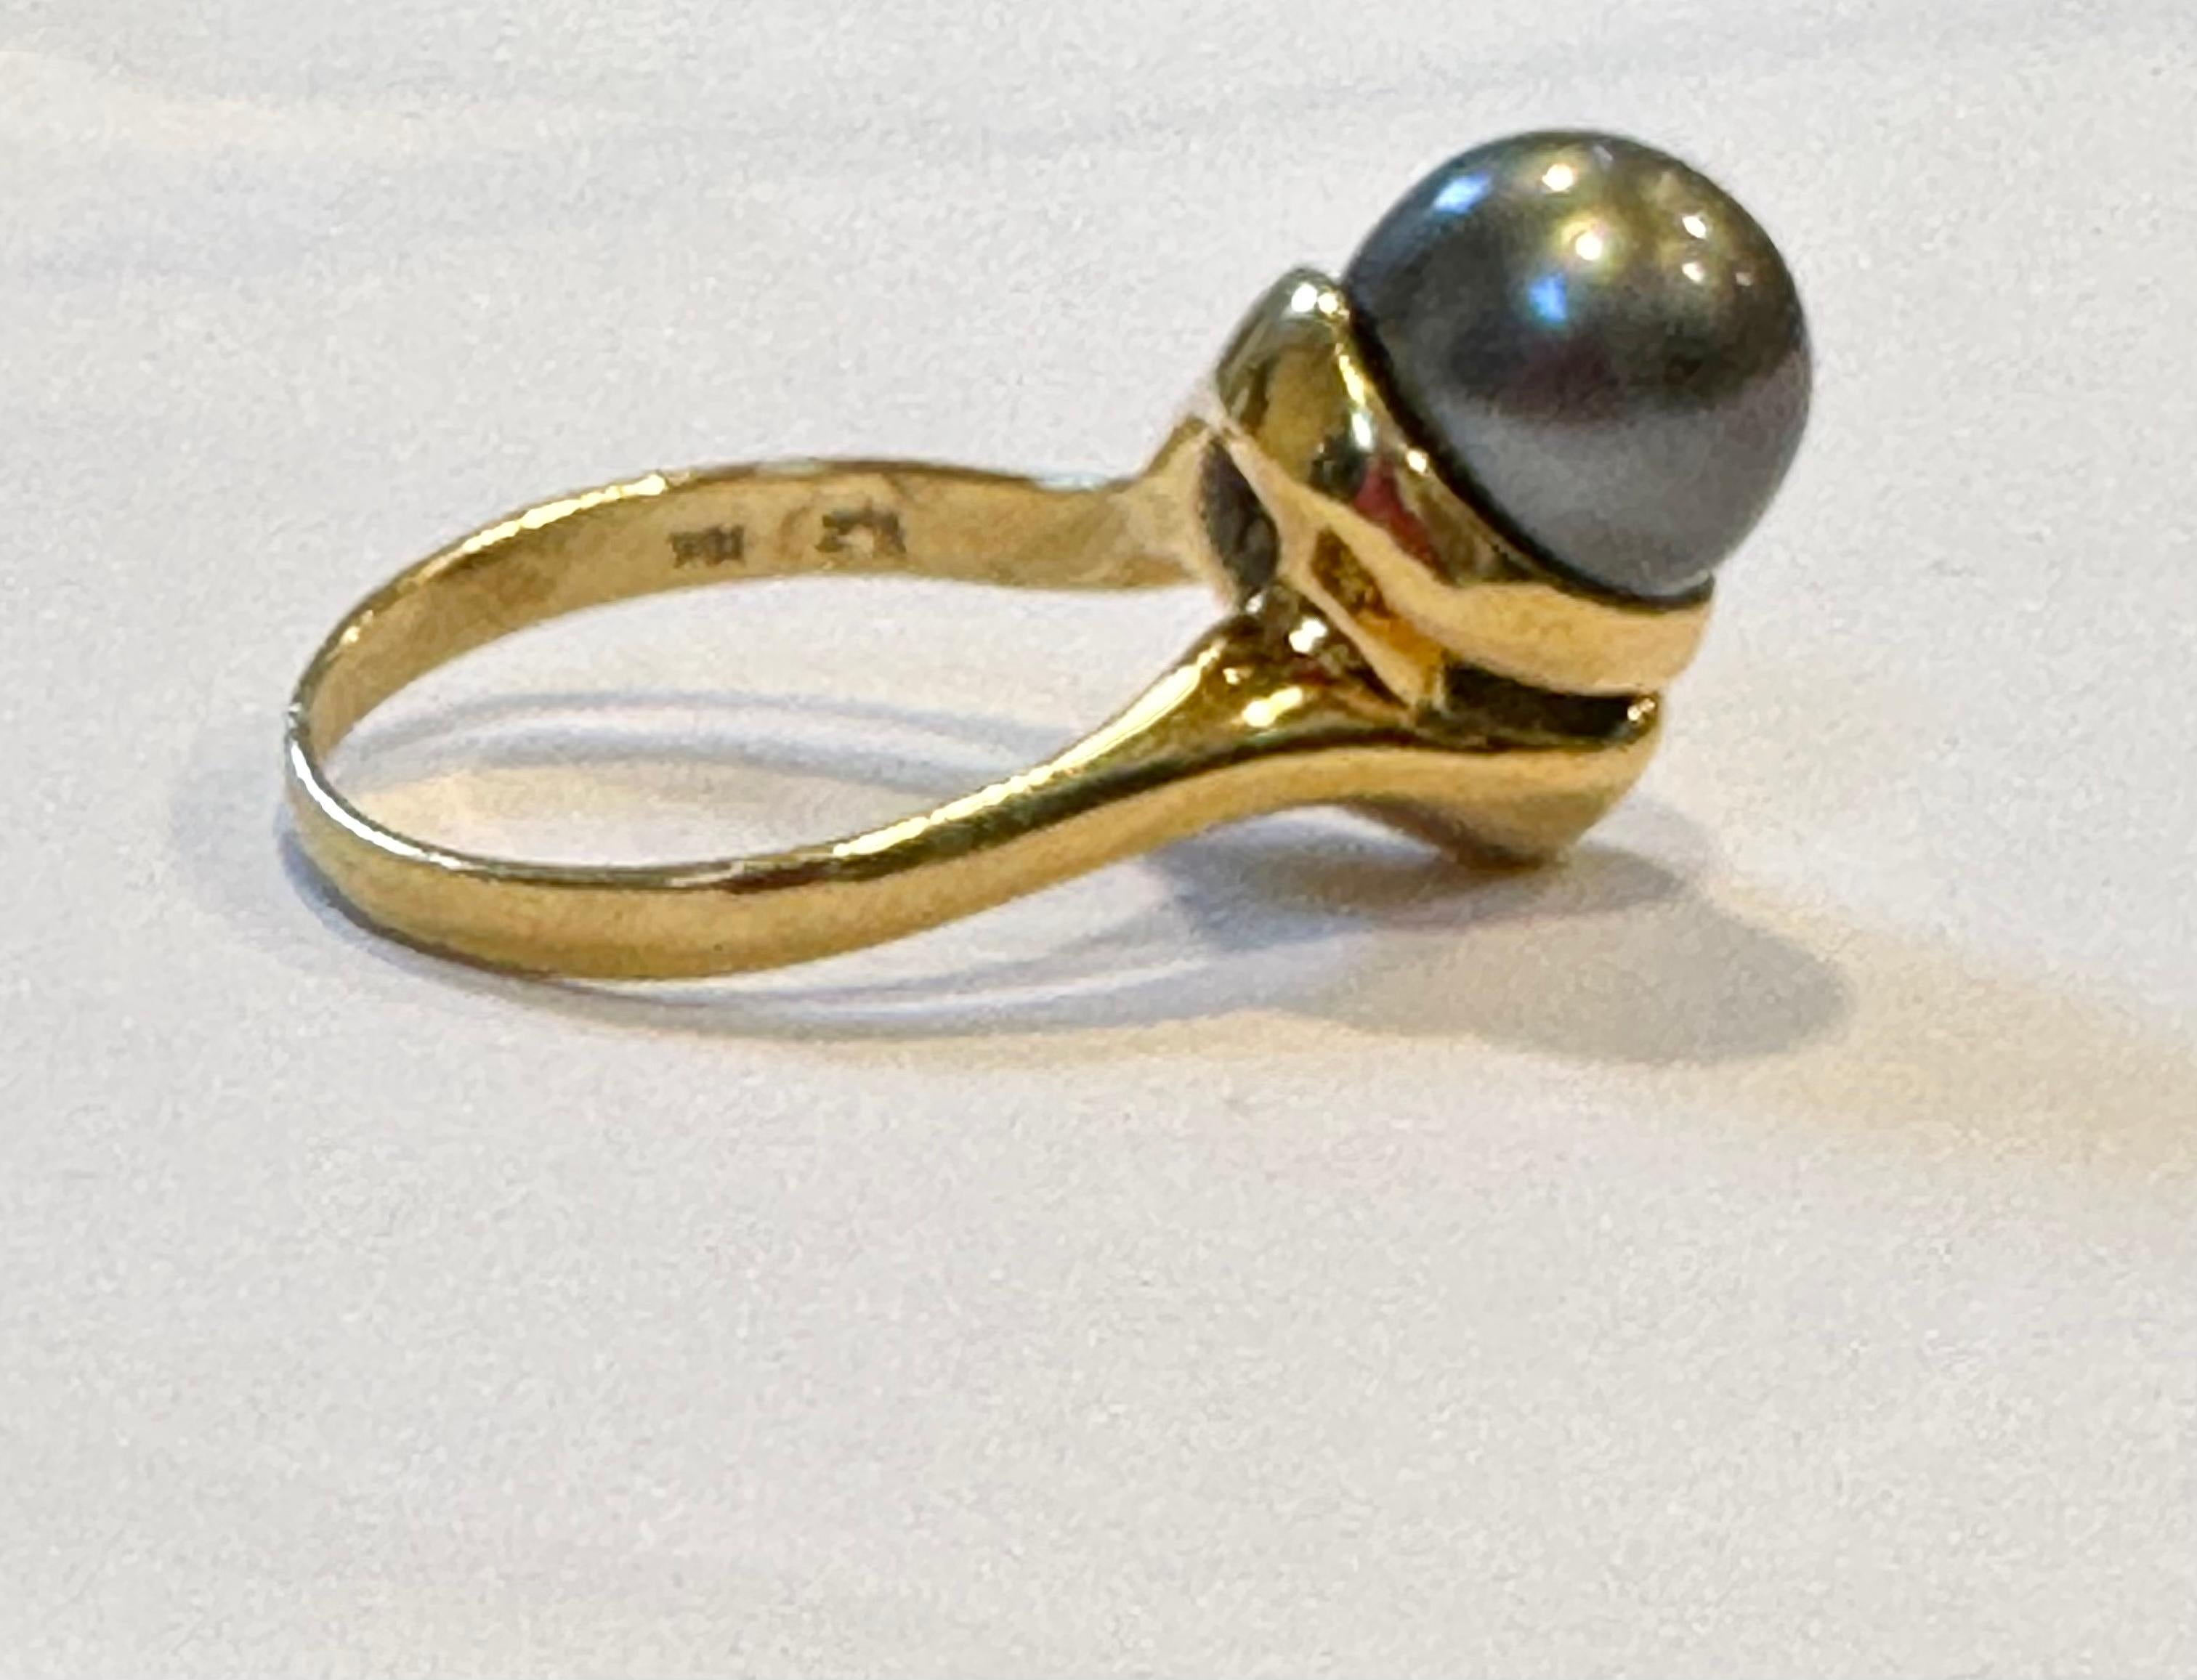 Black Tahitian Pearl 9.3 MM Cocktail Ring 18 Karat Yellow Gold Size 6
A classic, Cocktail ring 
9.3 mm Pearl very clean , in round shape , full of luster and shine  .

18 Karat Yellow gold 
Weight: 7 gram
Ring Size 6
It’s very hard to capture the